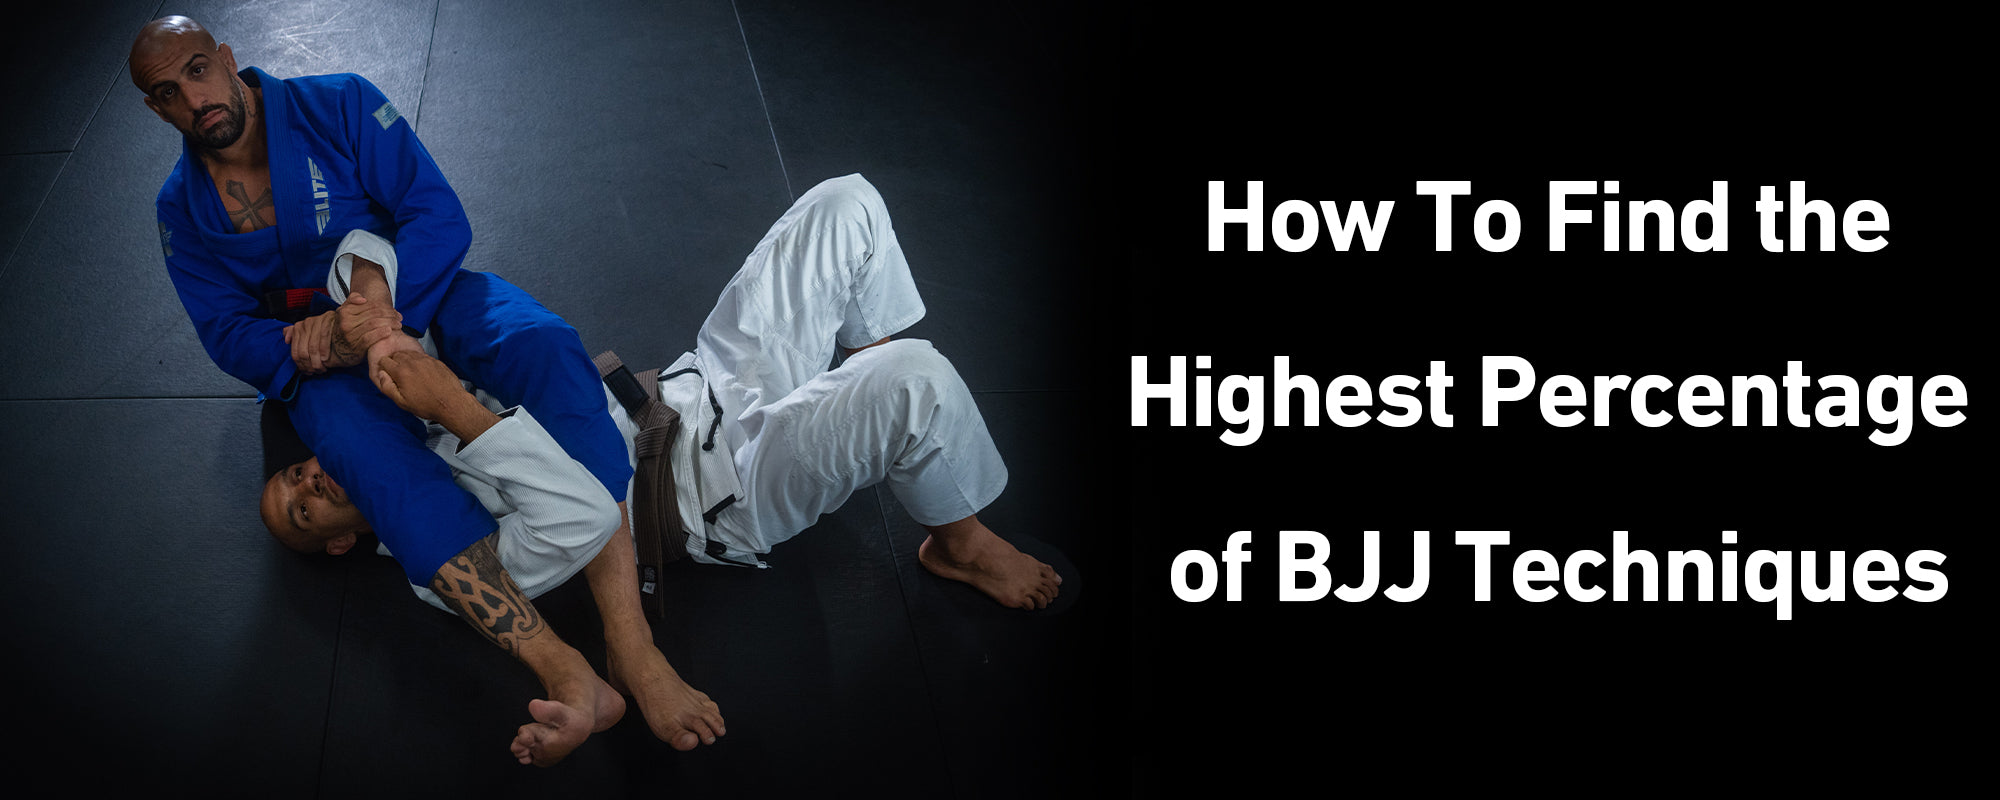 How To Find the Highest Percentage of BJJ Techniques